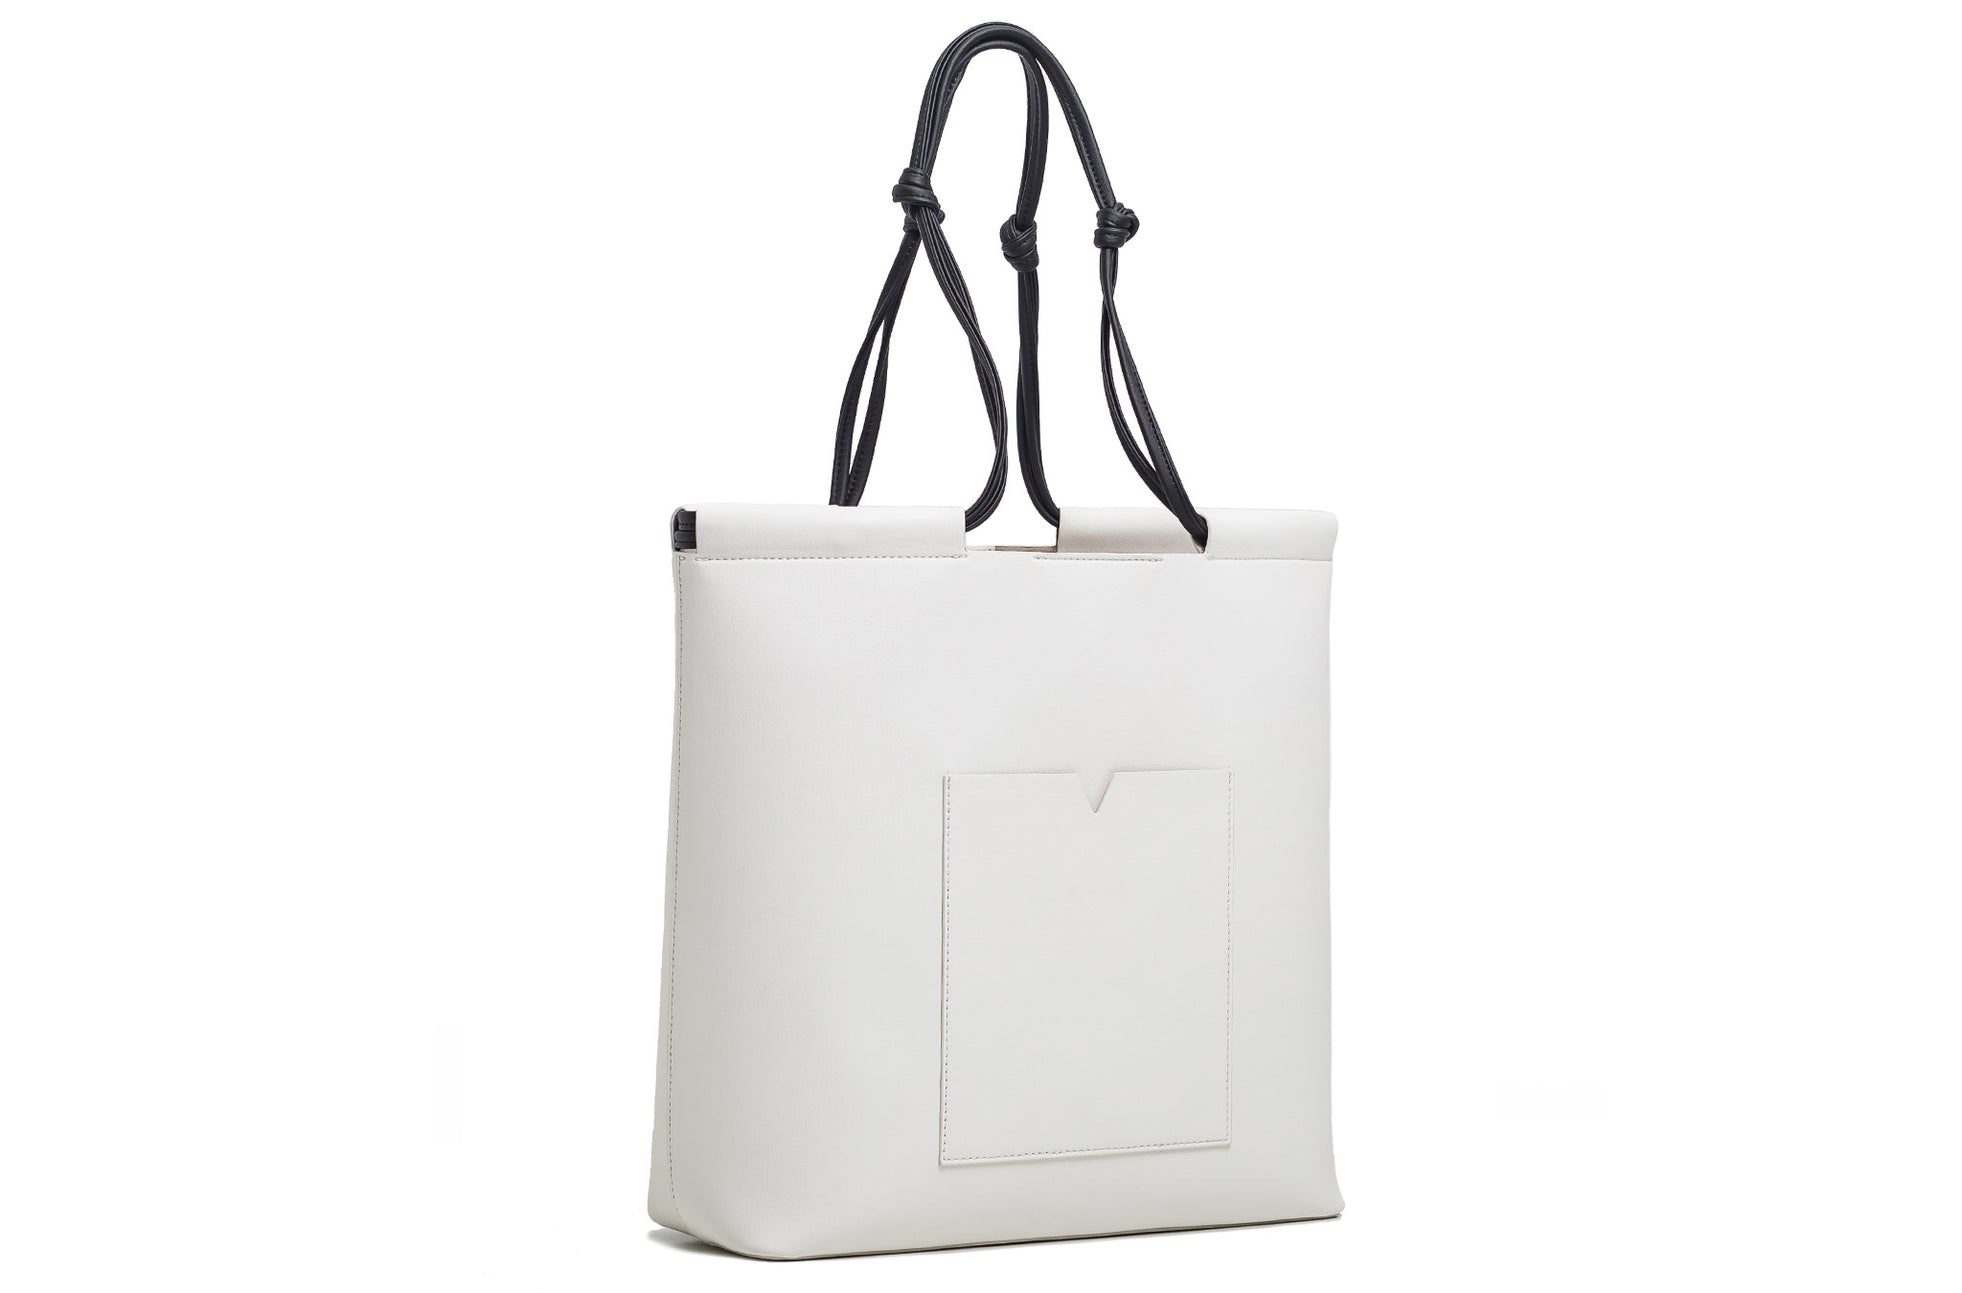 The Market Tote in Technik-Leather in White and Black image 3